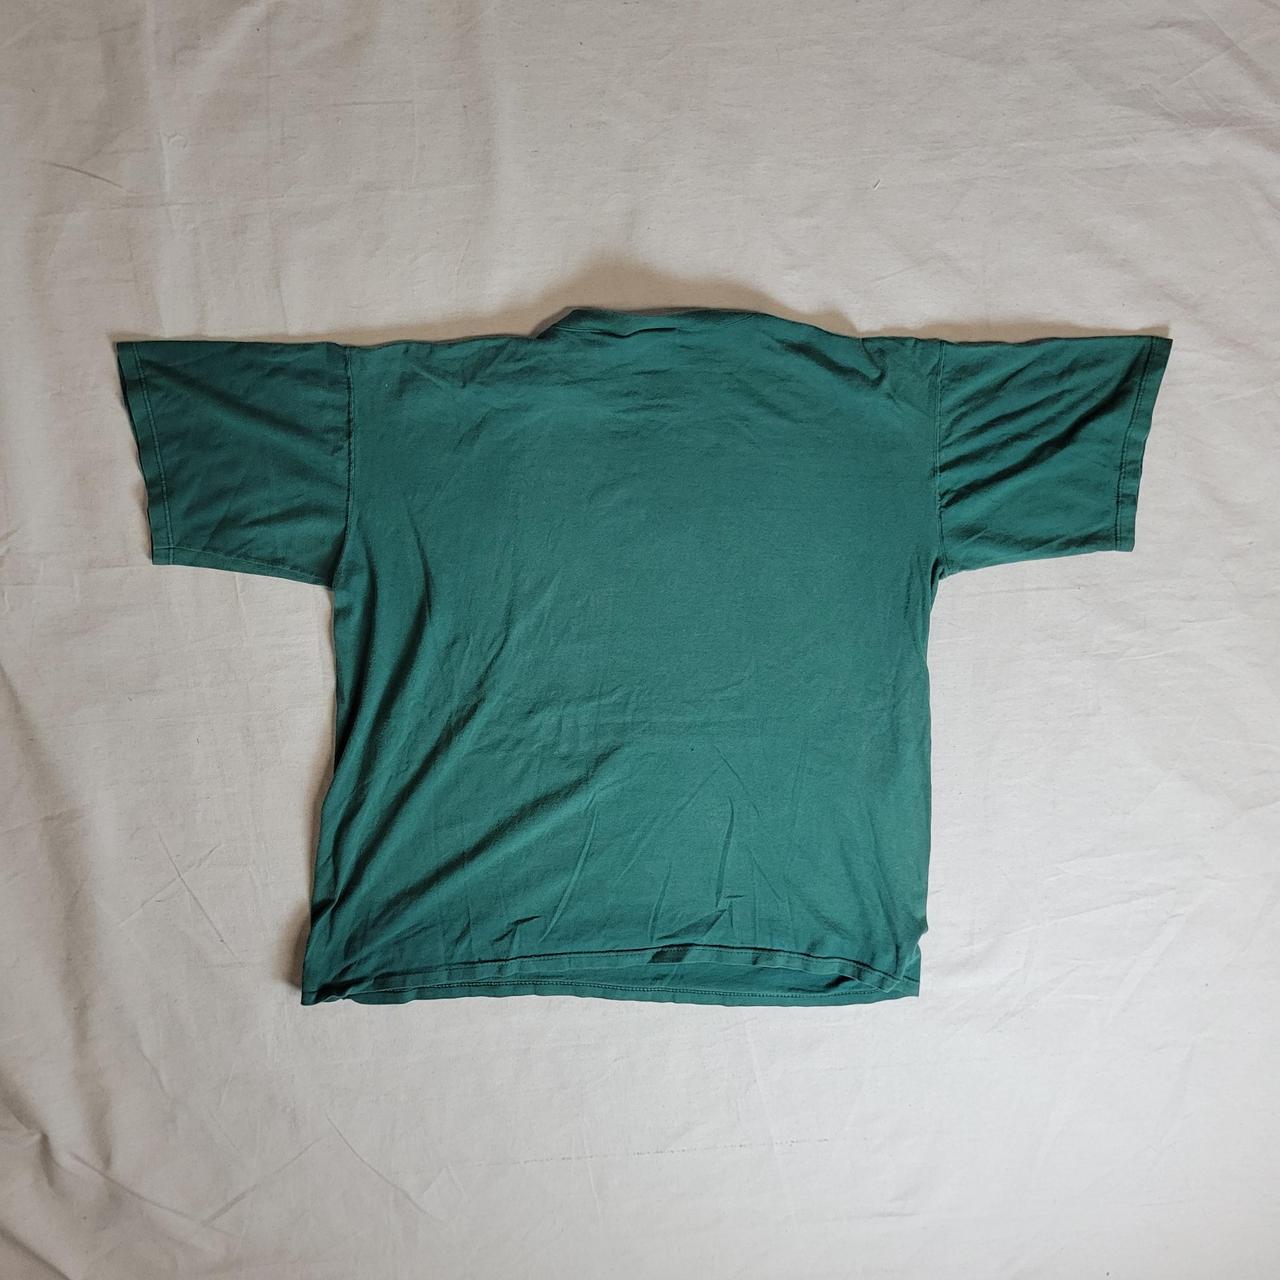 Vintage Adidas forest green t-shirt with classic... - Depop